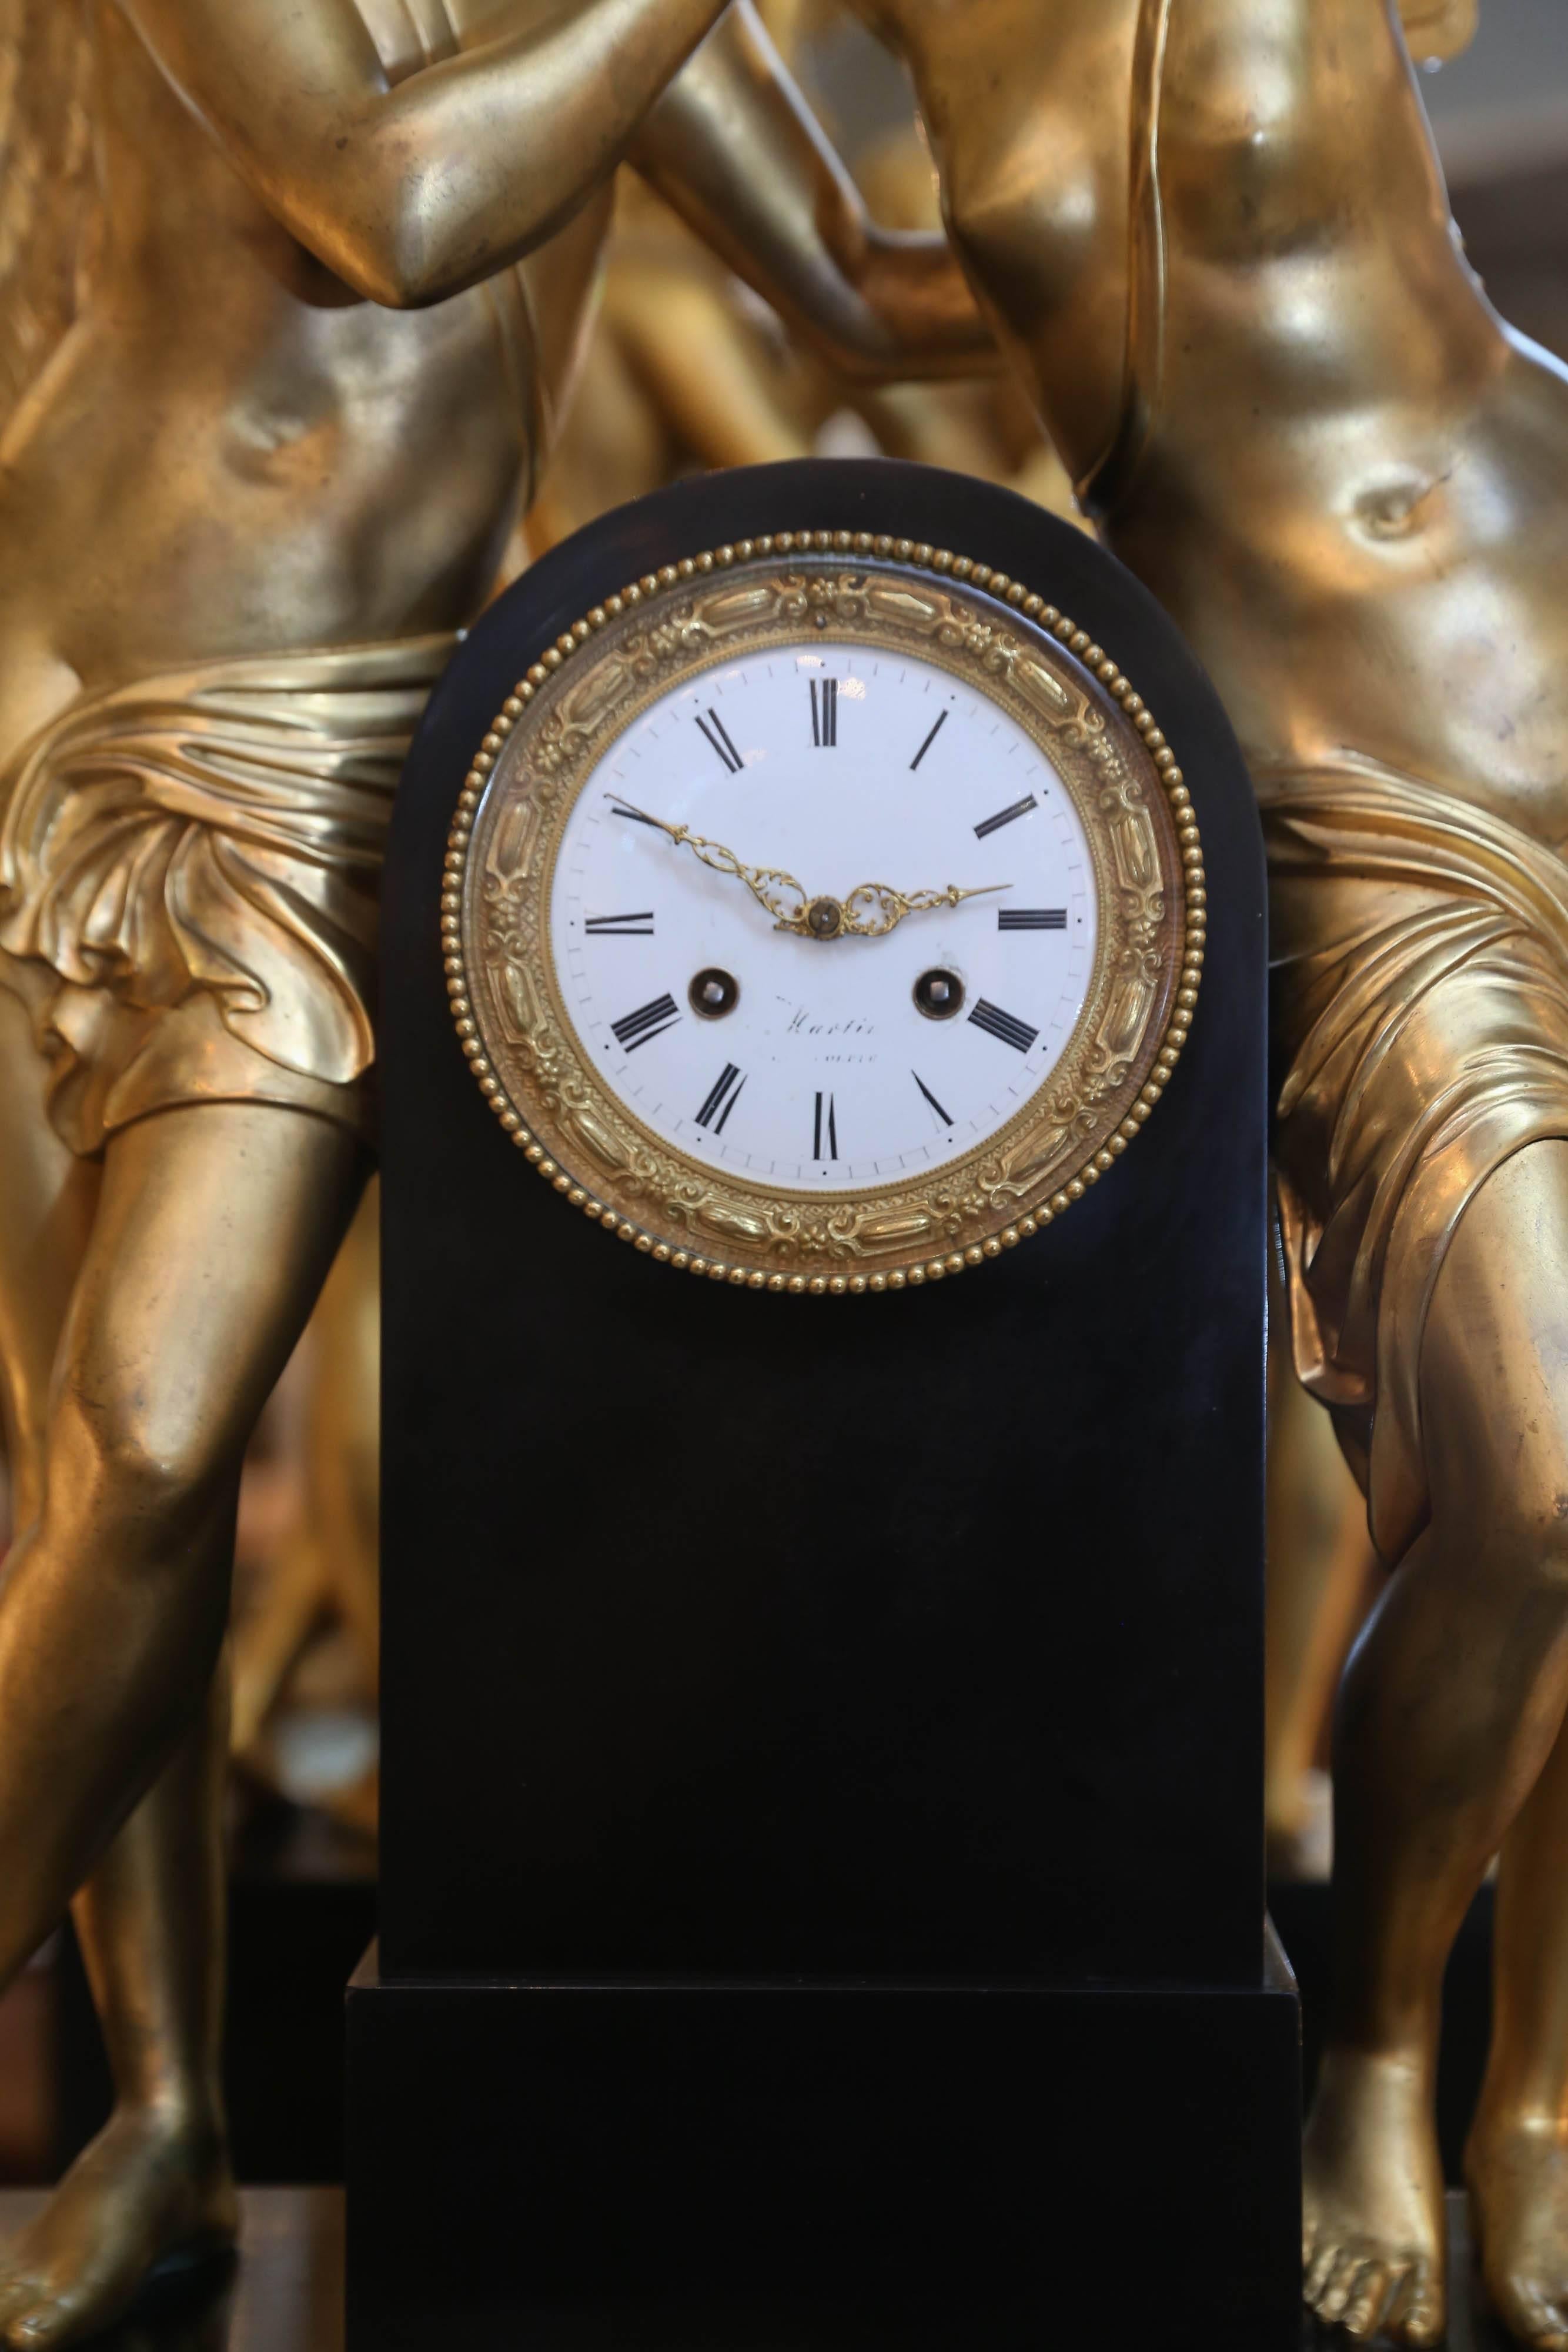 Amazing clock depicting the tale of Amor and Psyche which
Is about the god of love in Greek mythology. Large bronze
Dore figures adorn the pediment standing on a rectangular
Marble base. It has an enamel face marked with Roman numerals. On the